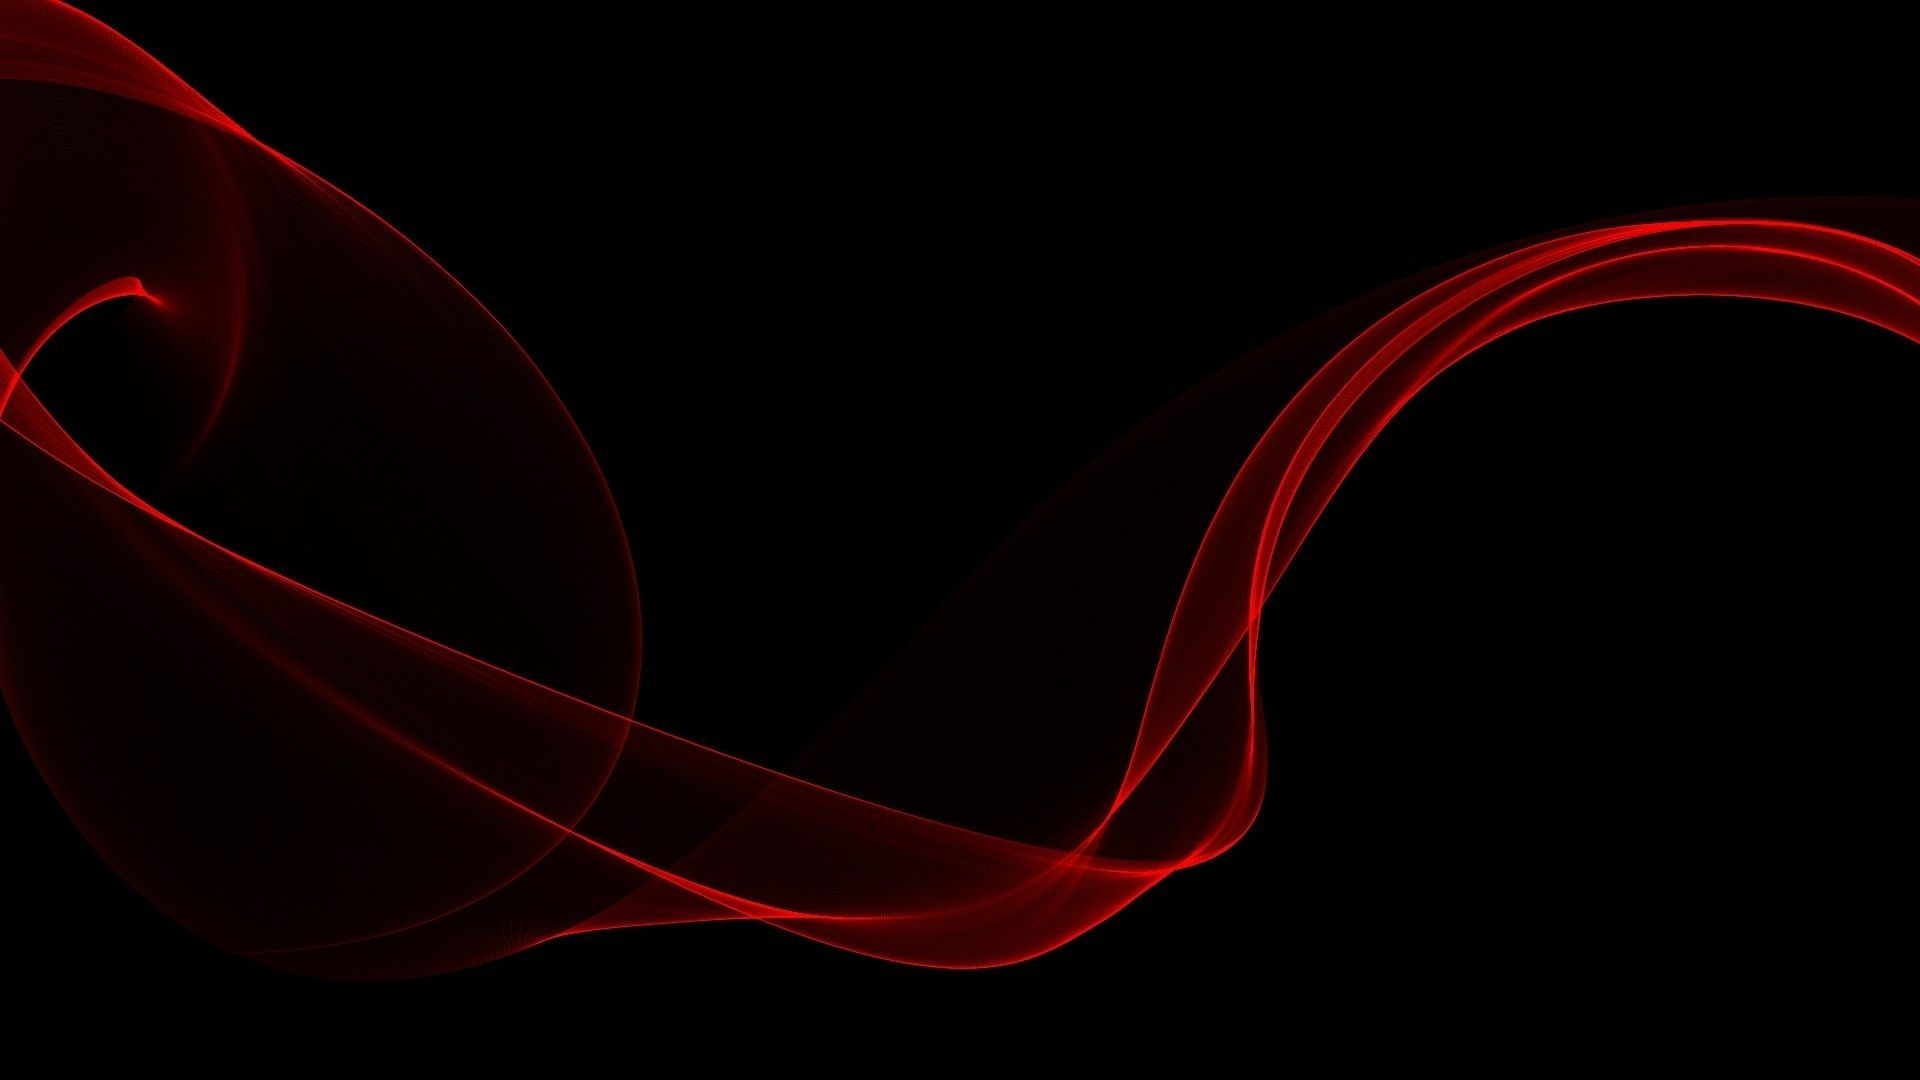 10 New 1920X1080 Red And Black Wallpaper FULL HD 1080p For PC